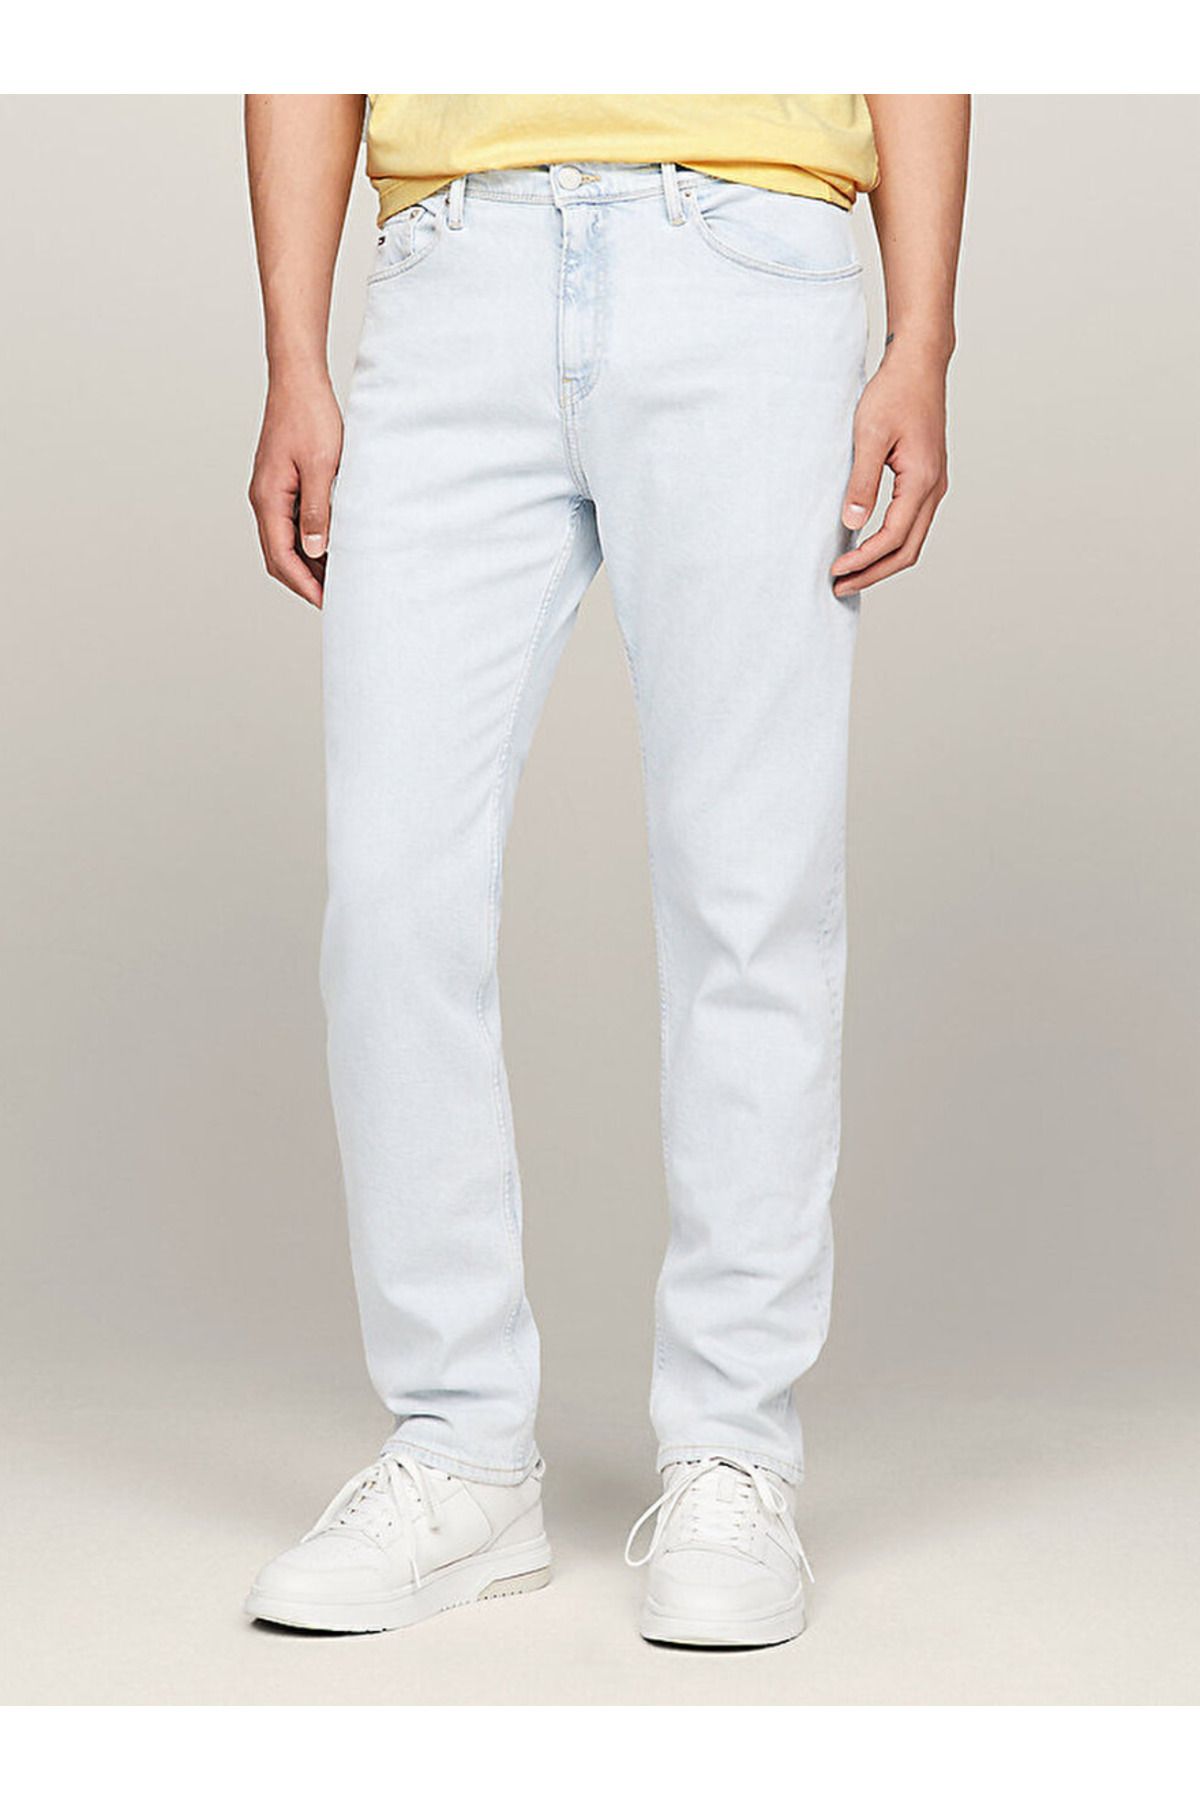 Tommy Hilfiger Ethan Relaxed Straight Light Wash Jeans